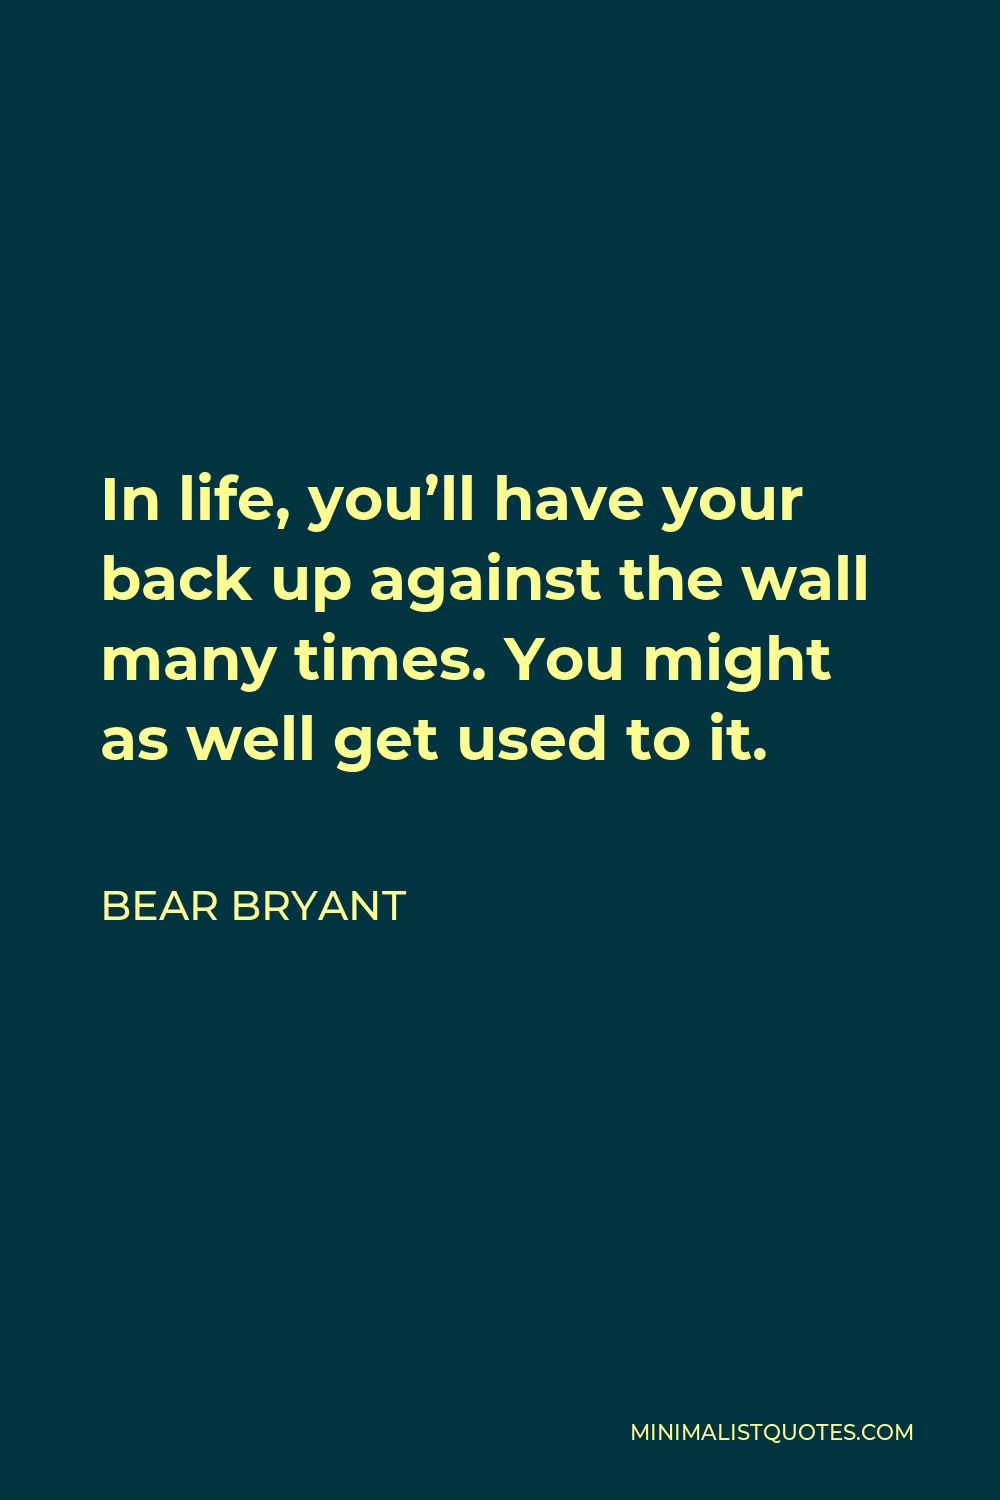 Bear Bryant Quote - In life, you’ll have your back up against the wall many times. You might as well get used to it.